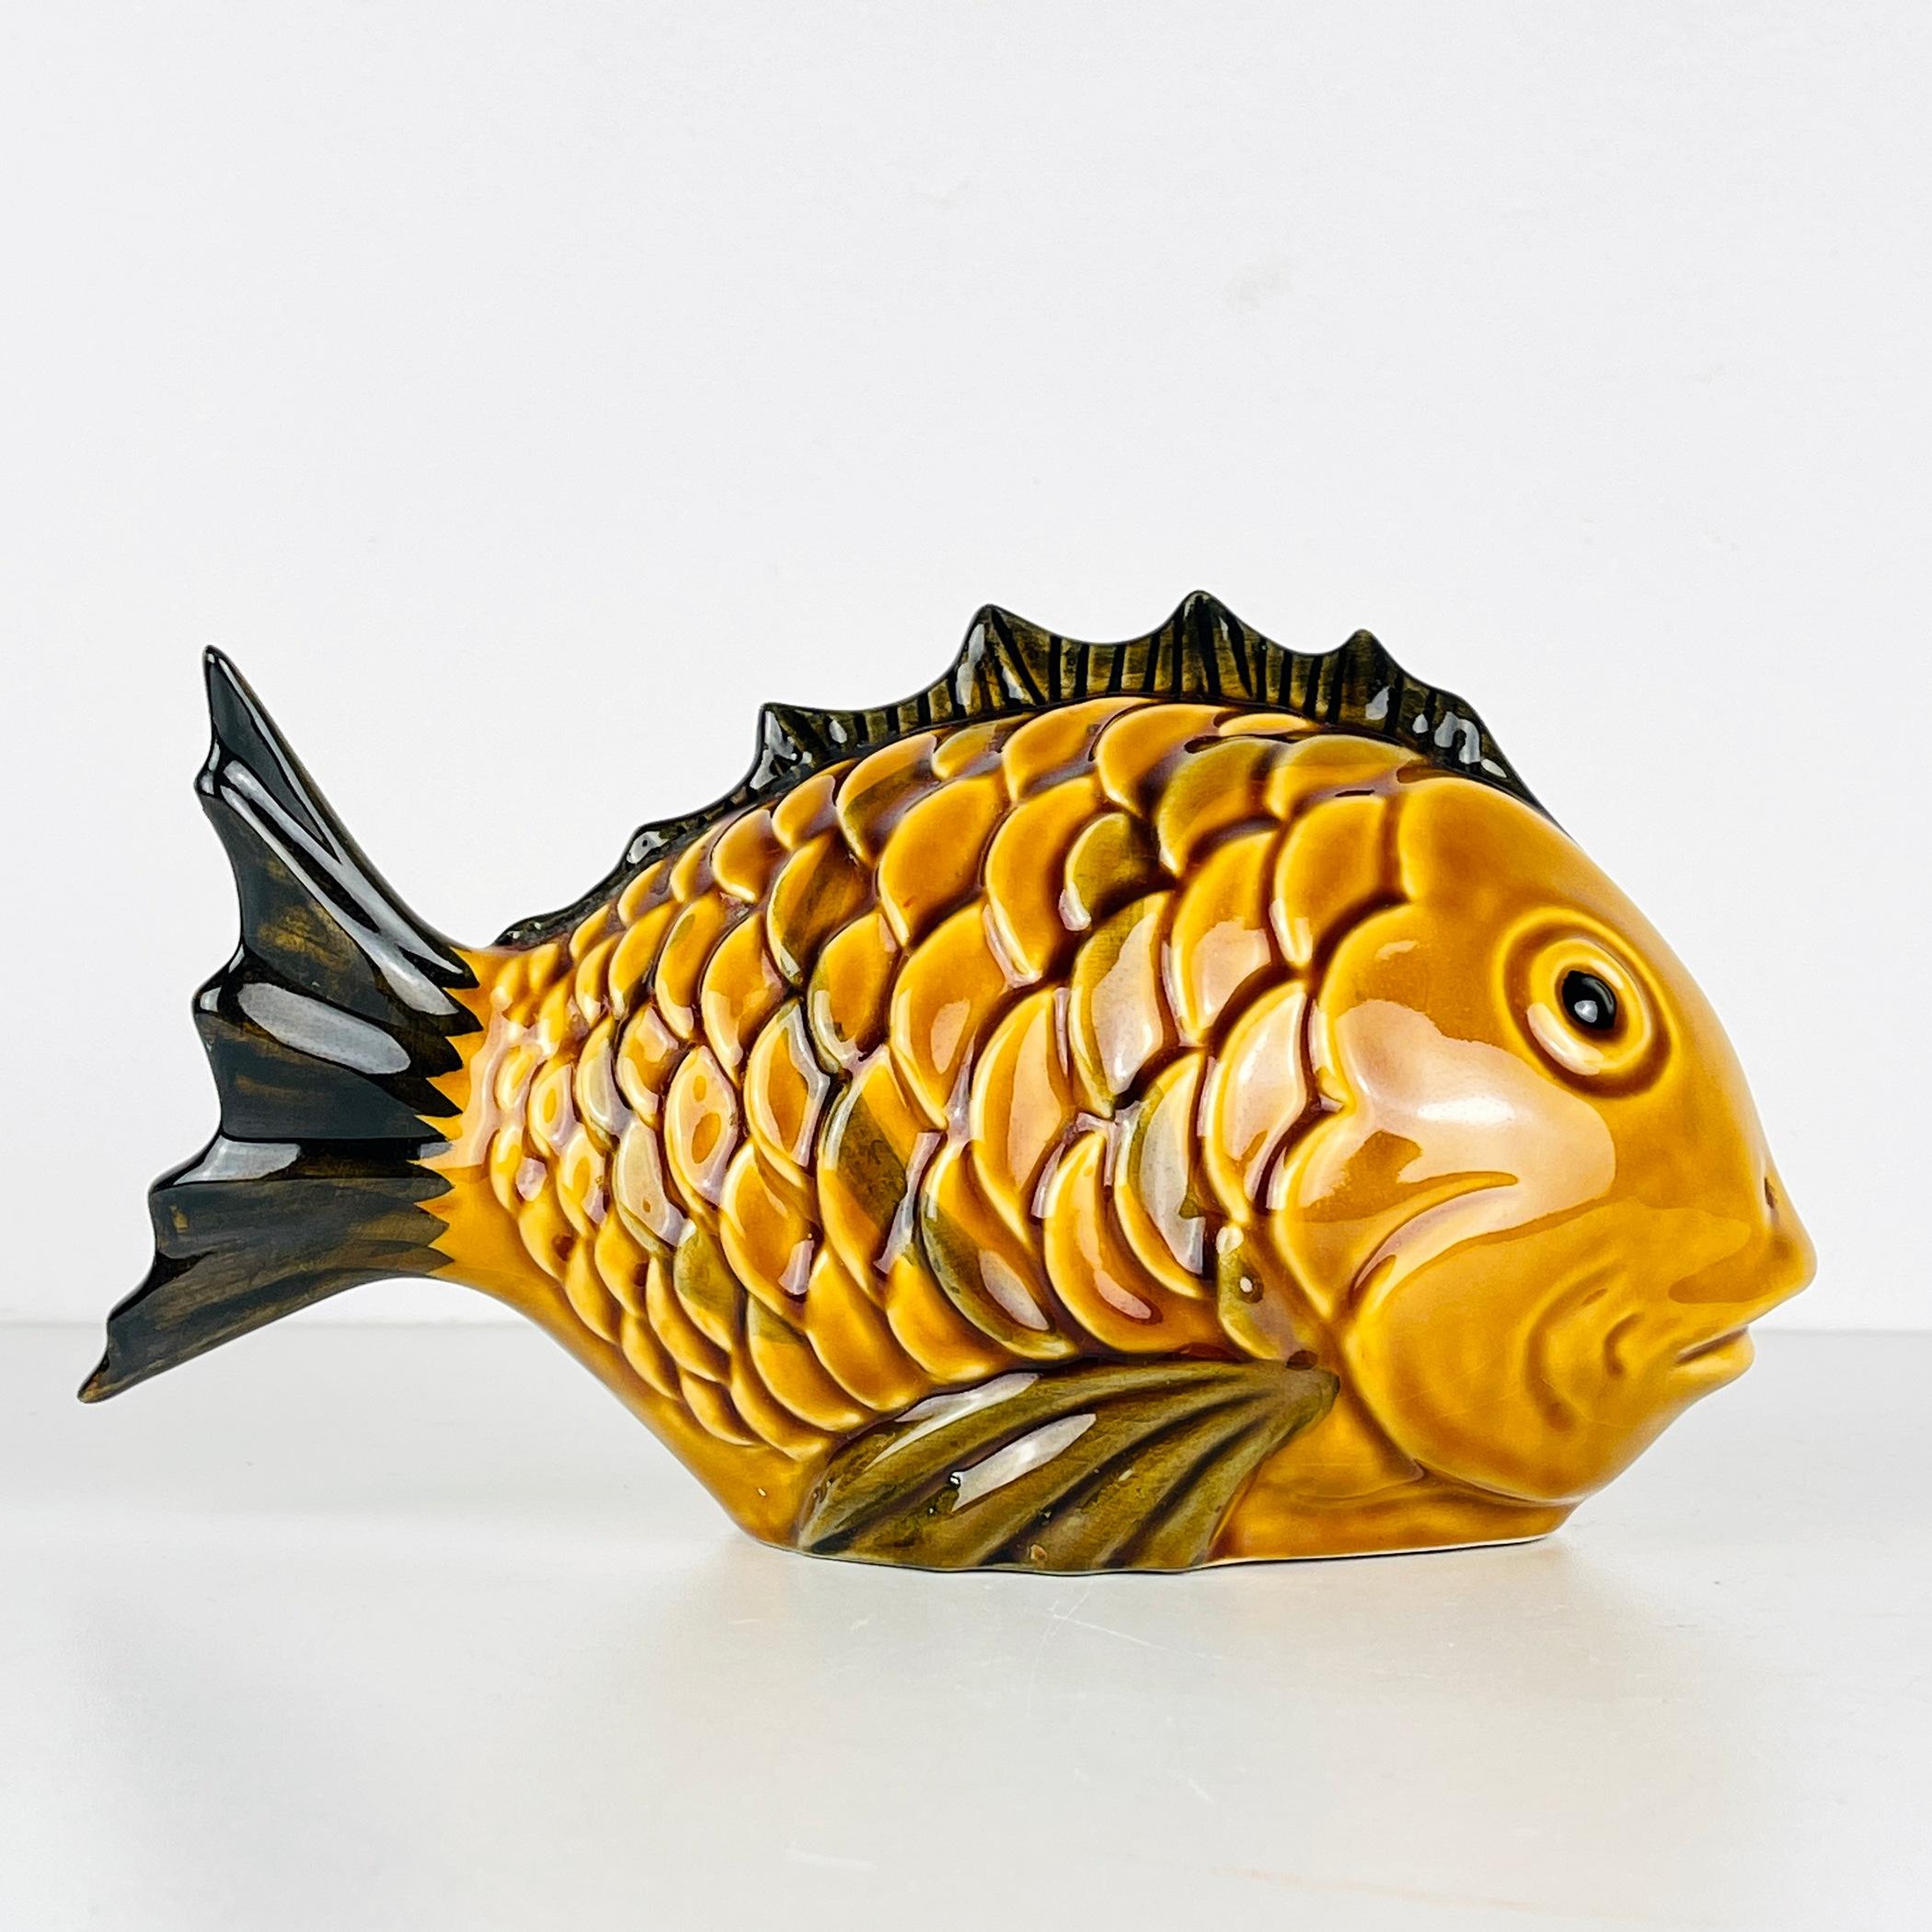 Discover this charming vintage ceramic figure, a delightful fish, hailing from the artisan workshops of Portugal in the 1970s. Despite the passage of time, it has retained its allure and remains in very good condition. This exquisite piece is a